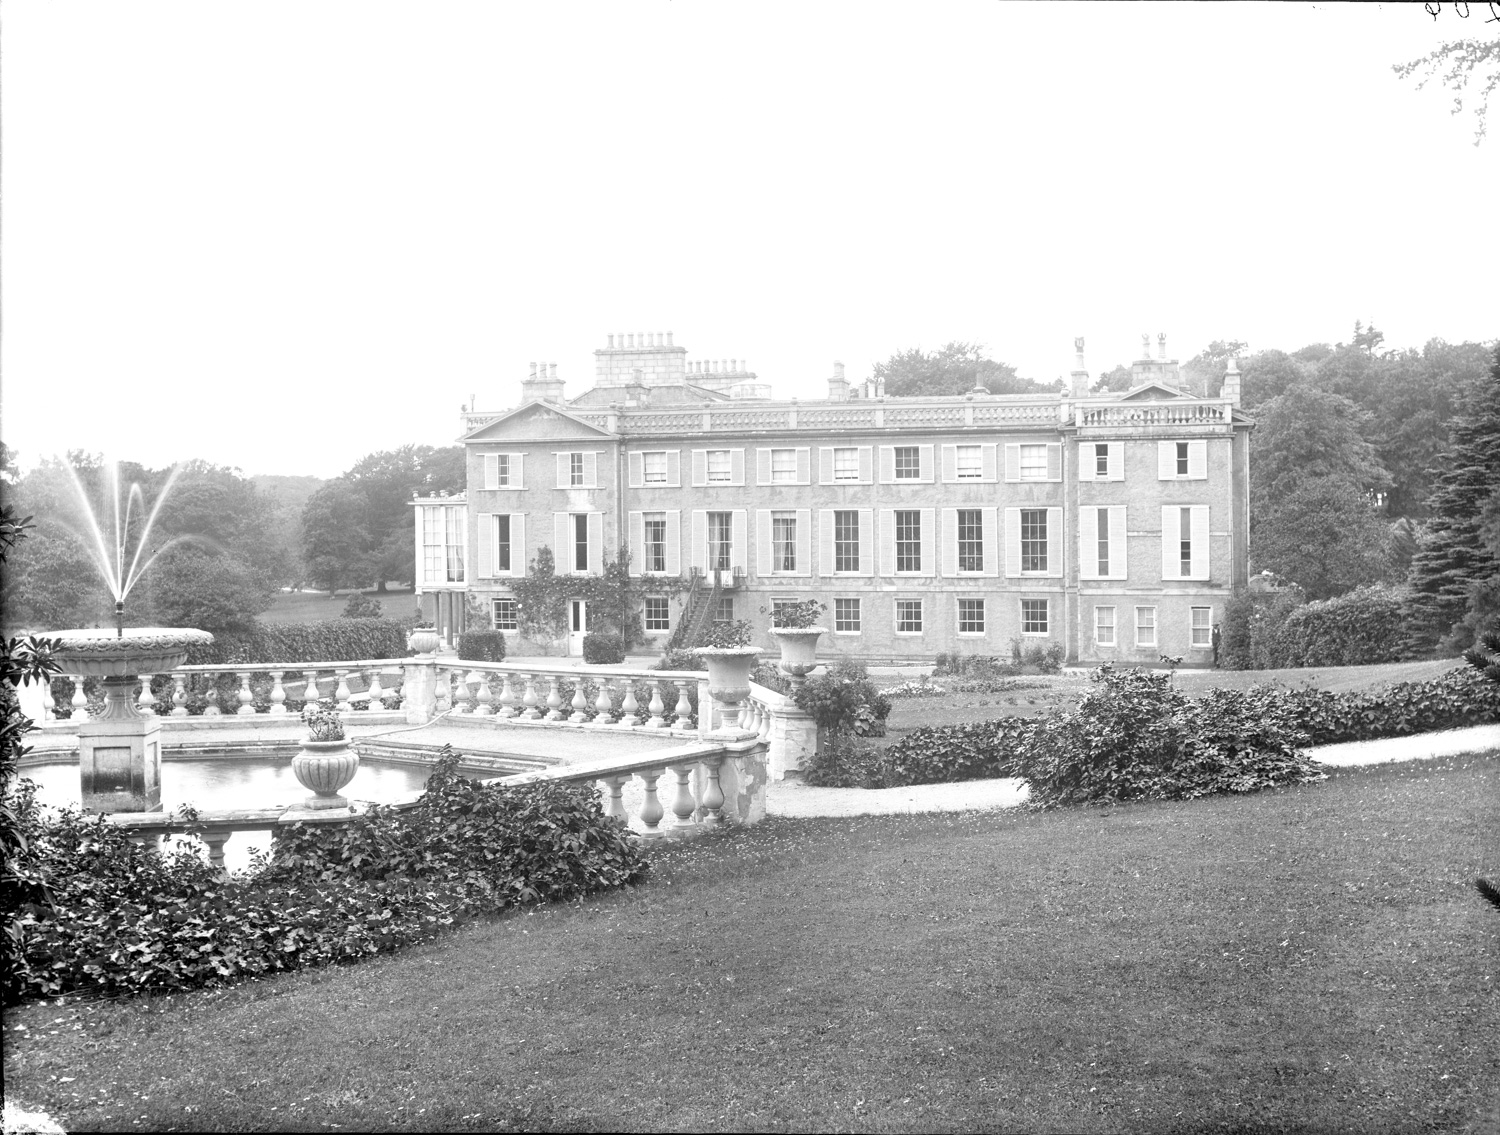 19th century image of Pitfour House, Mintlaw.